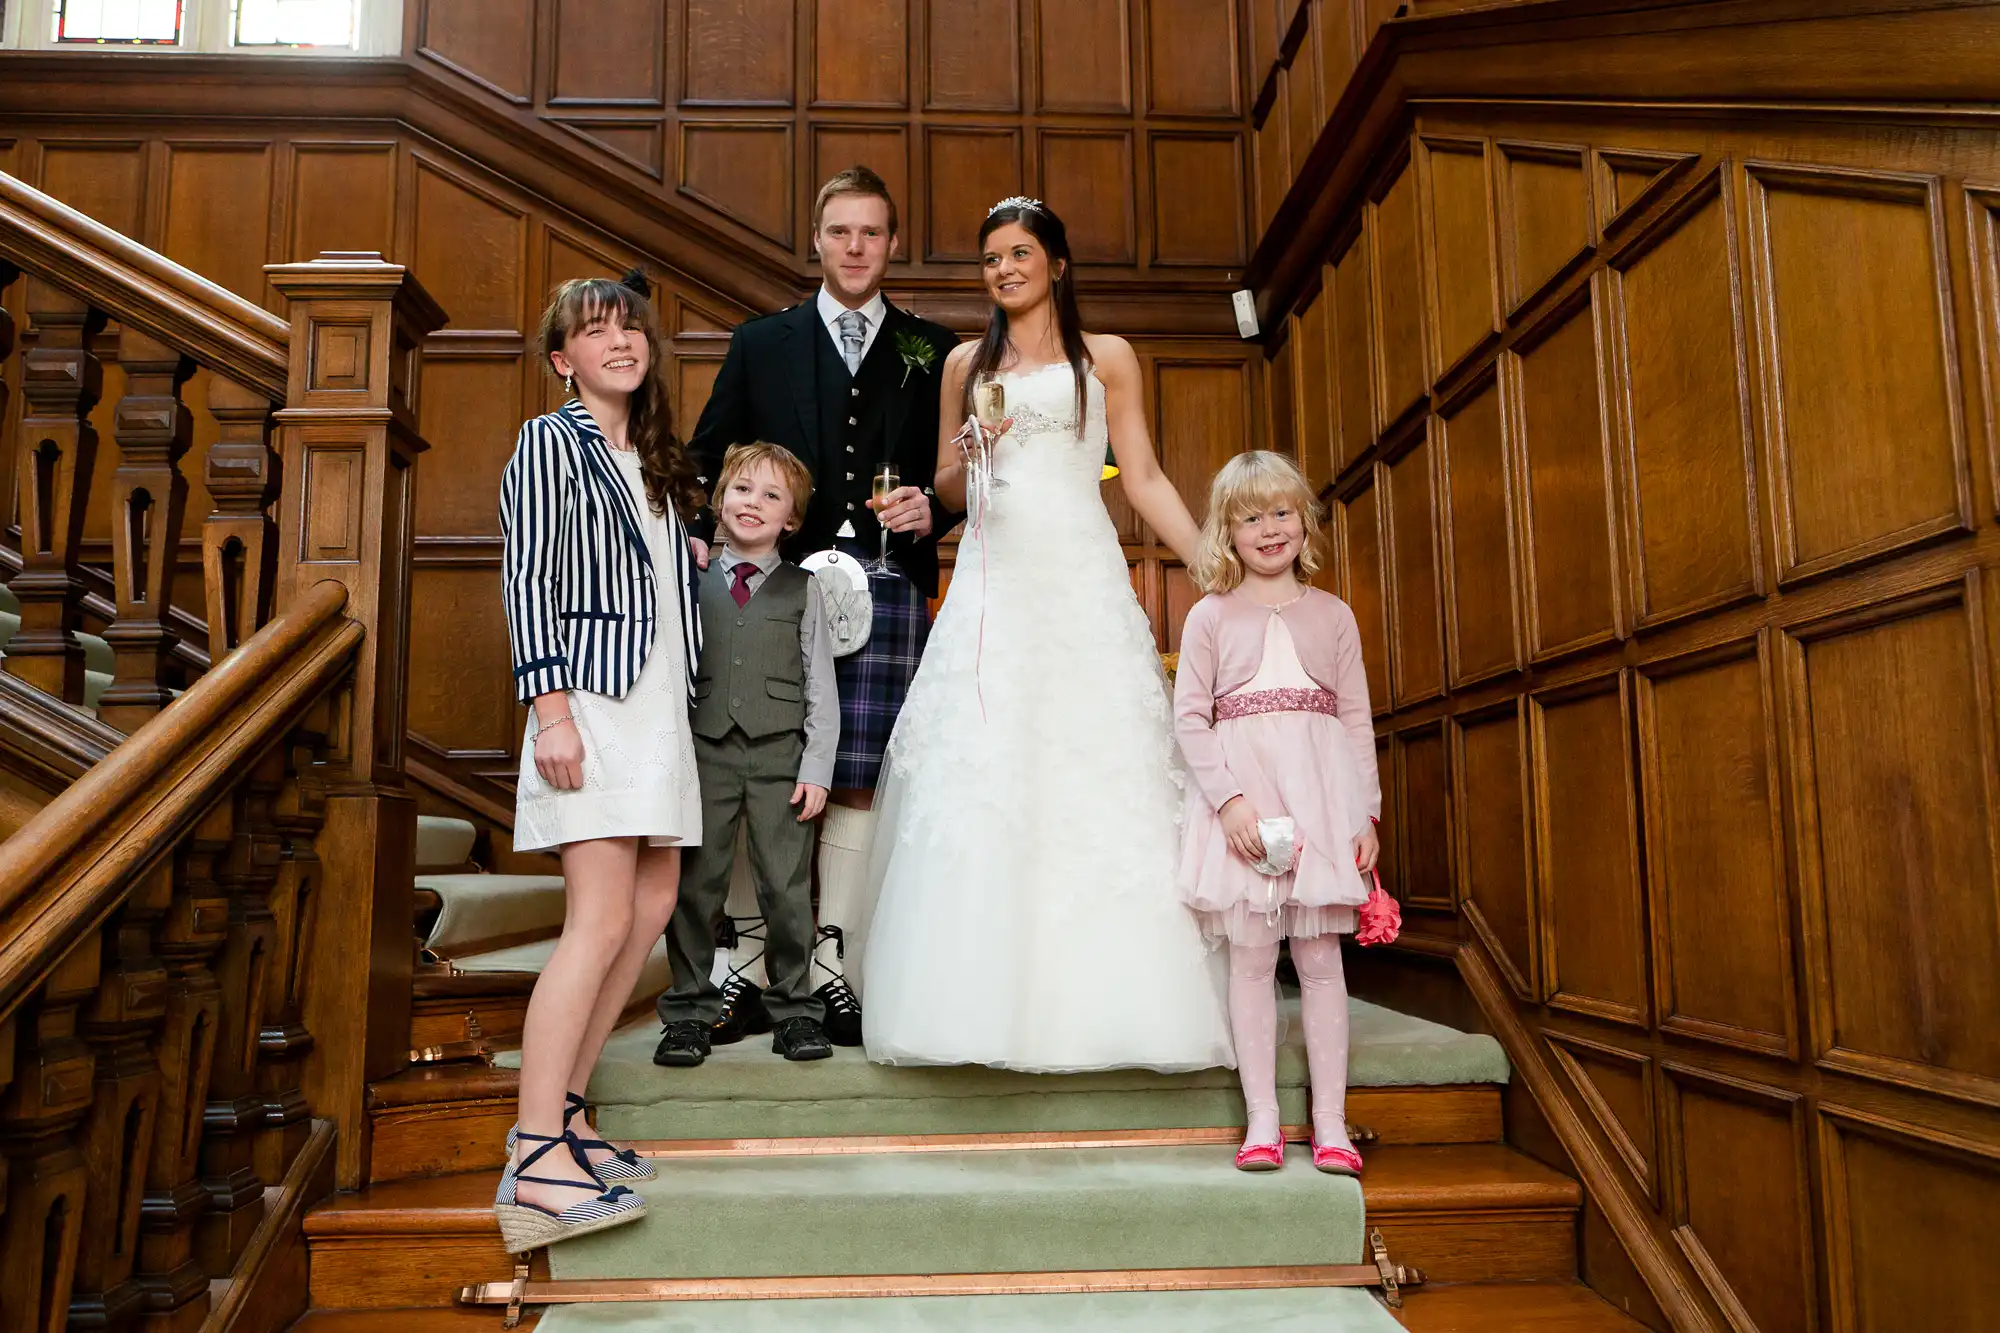 A newlywed couple standing on a staircase with three children, inside a vintage wooden paneled room, smiling for a photo.